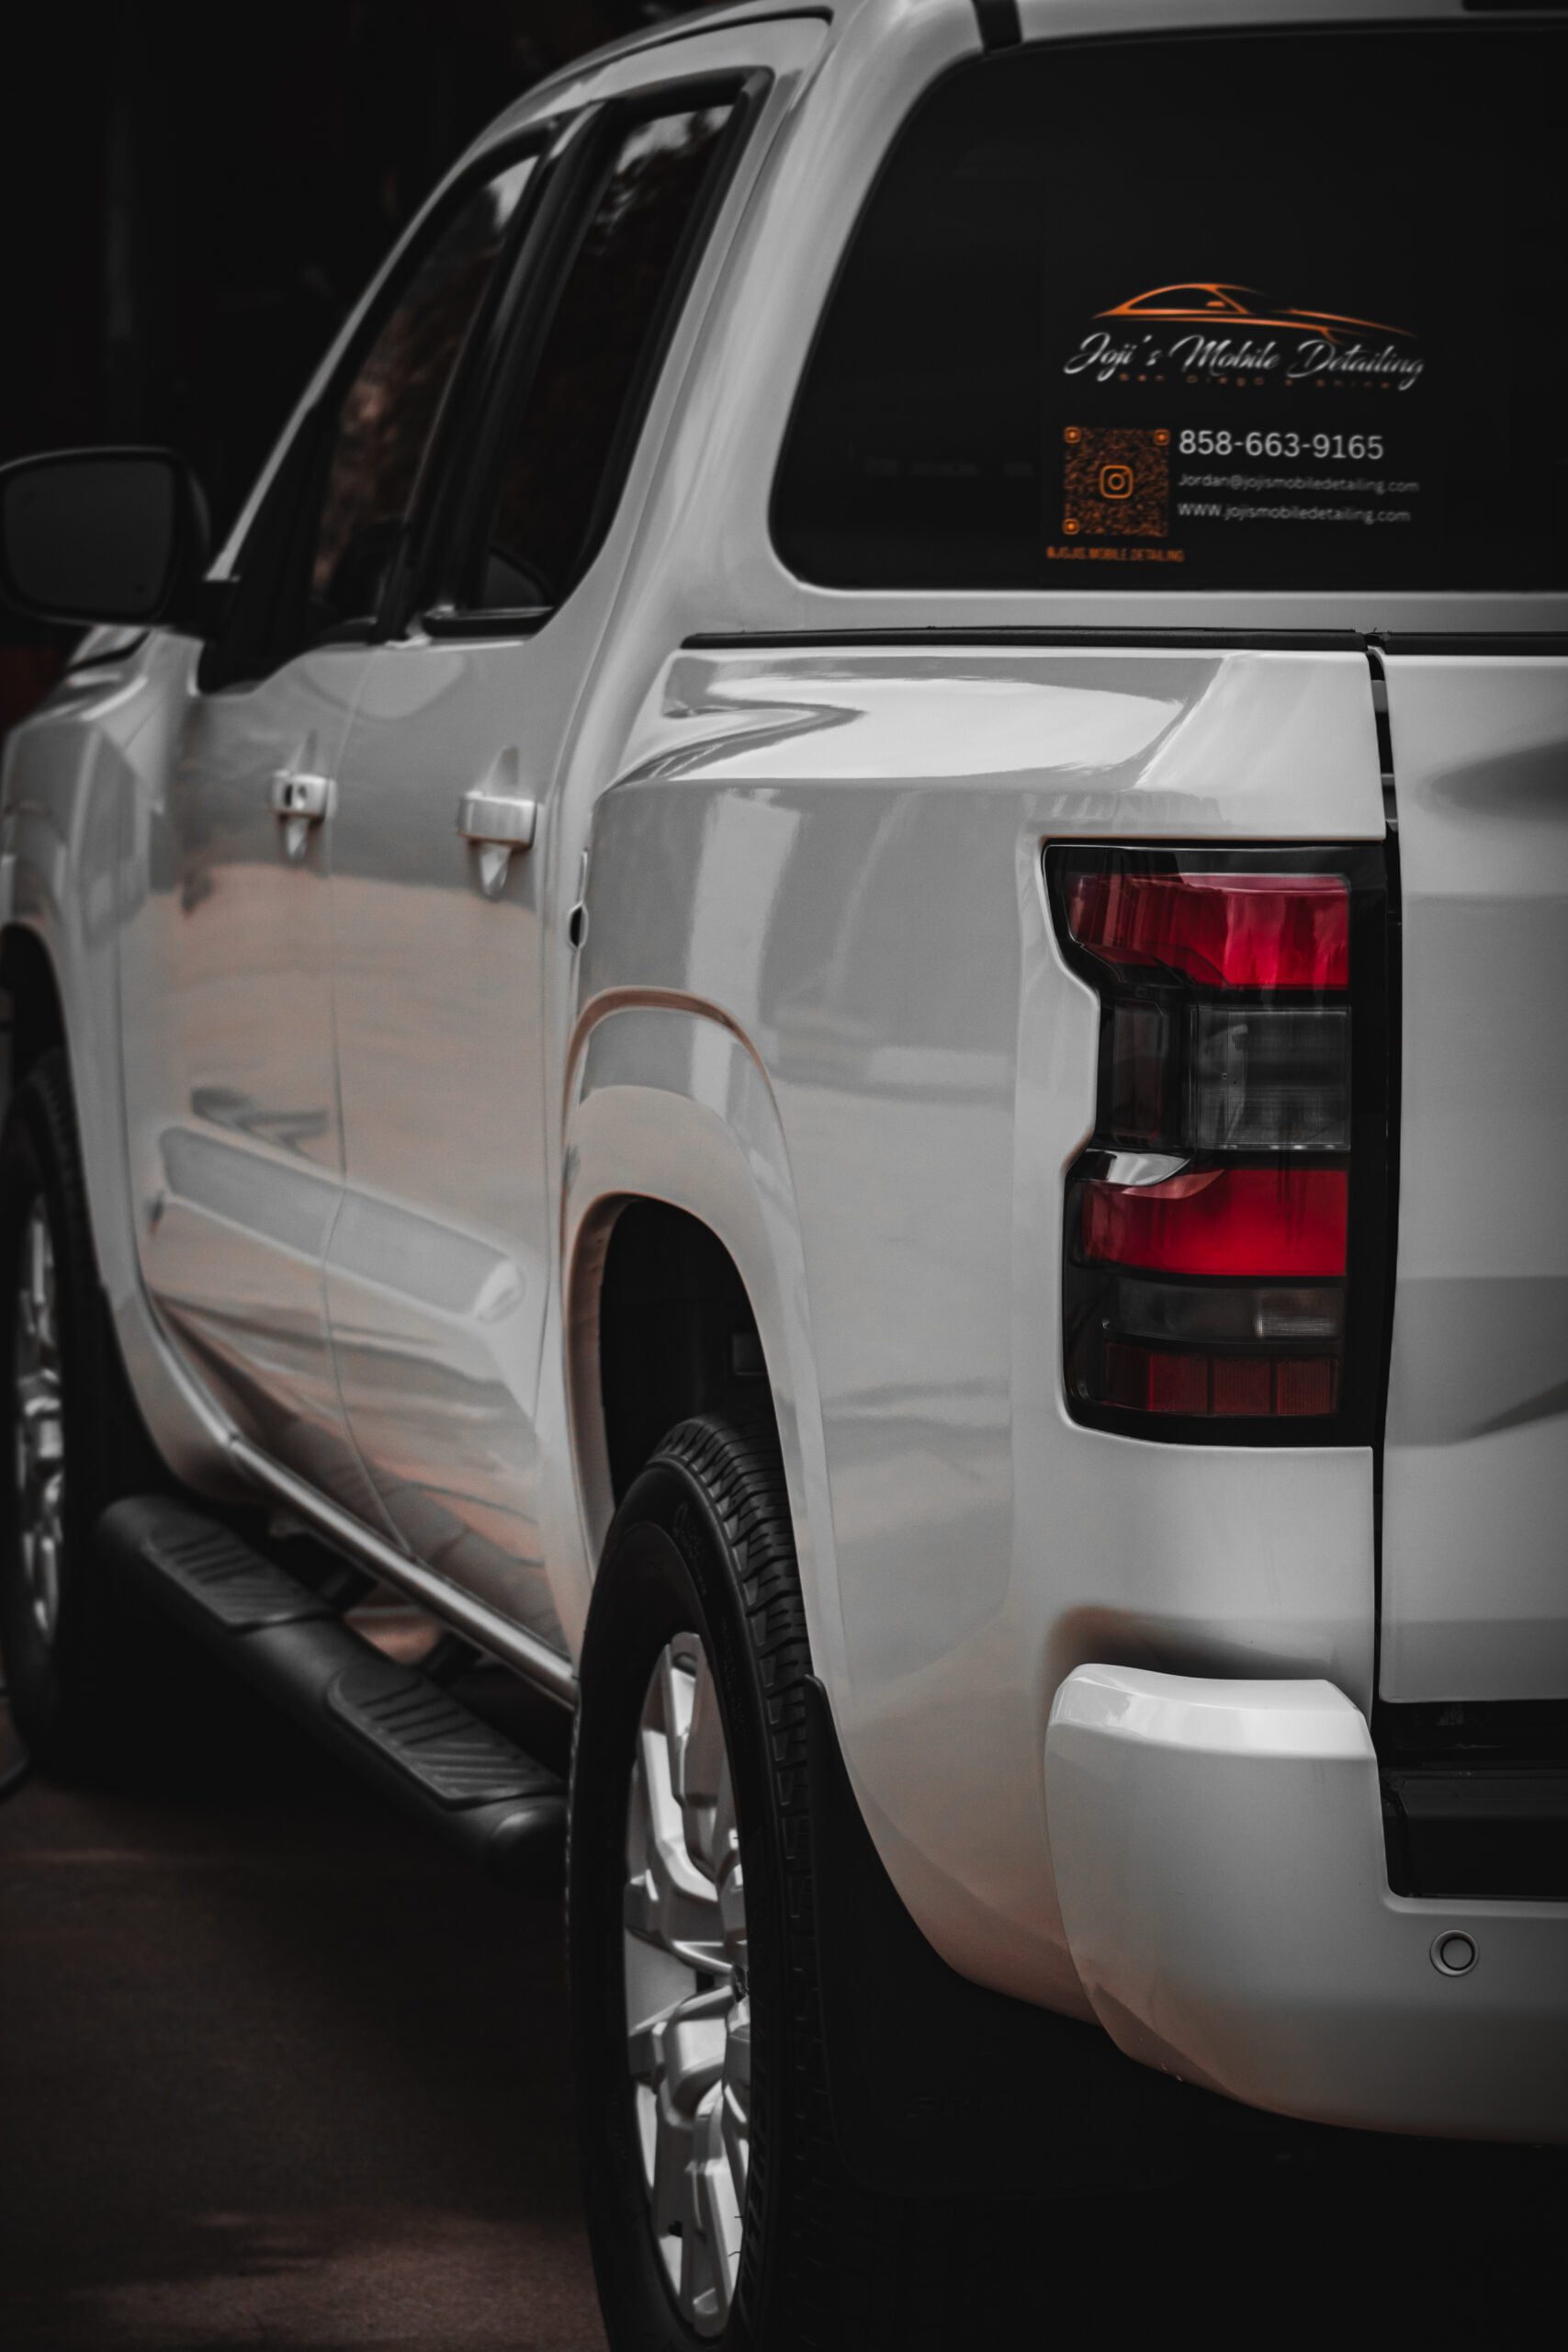 Revive Your Ride: Expert Mobile Detailing Services to Shine Bright on the Go!